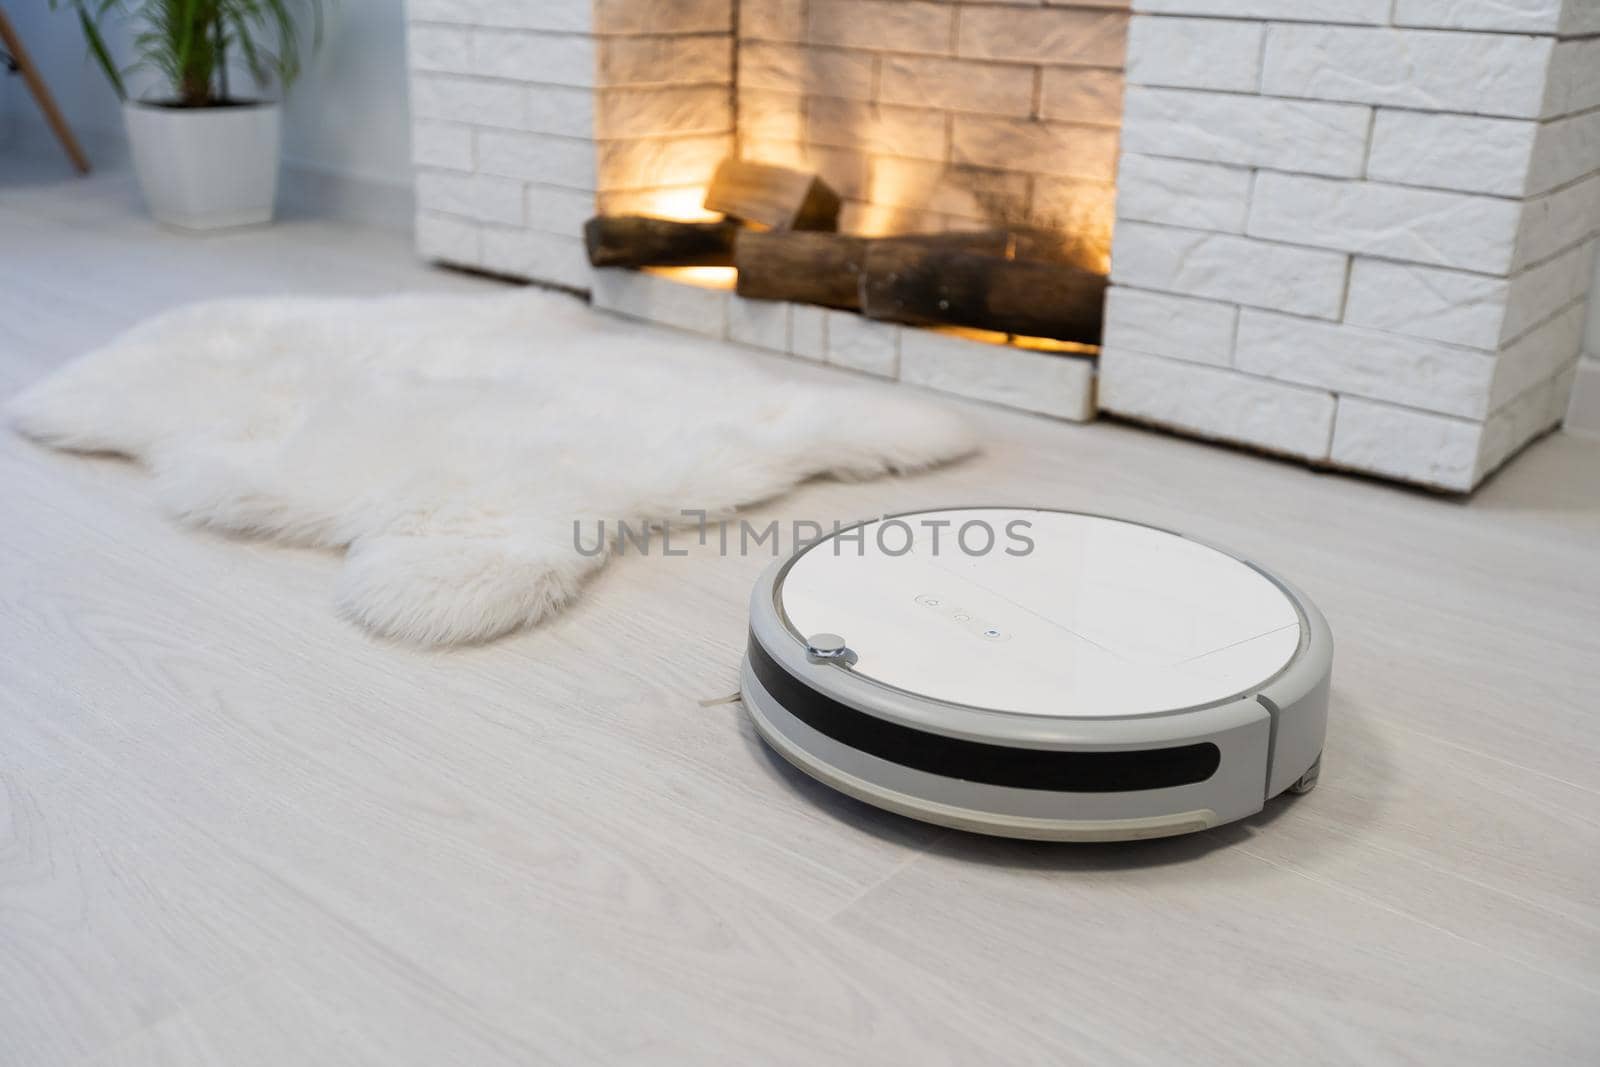 robotic vacuum cleaner on laminate wood floor smart cleaning technology by Andelov13